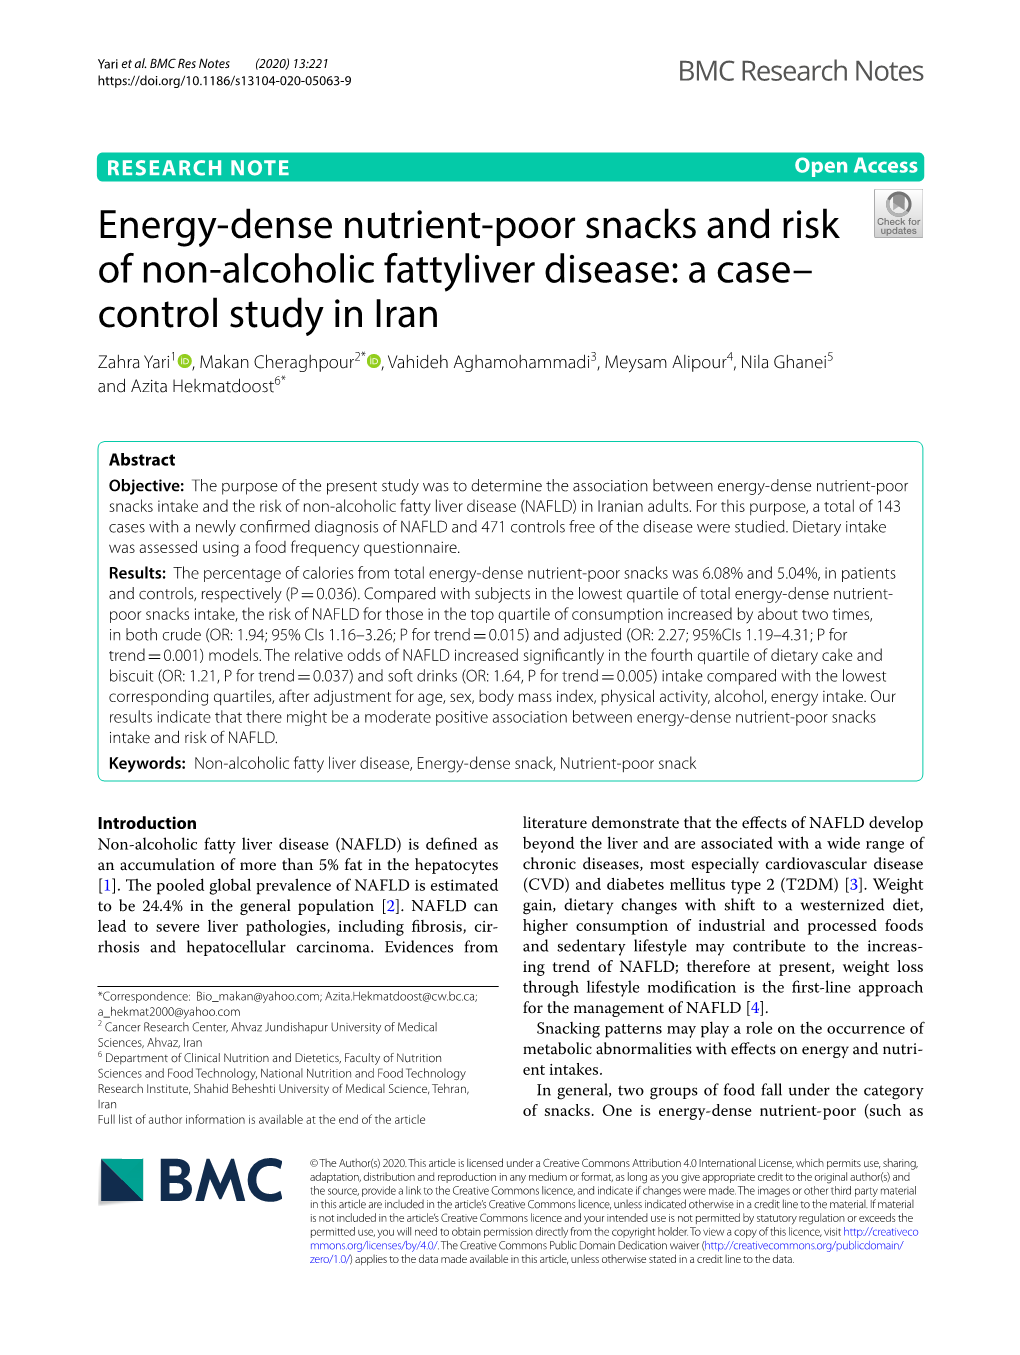 Energy-Dense Nutrient-Poor Snacks and Risk of Non-Alcoholic Fattyliver